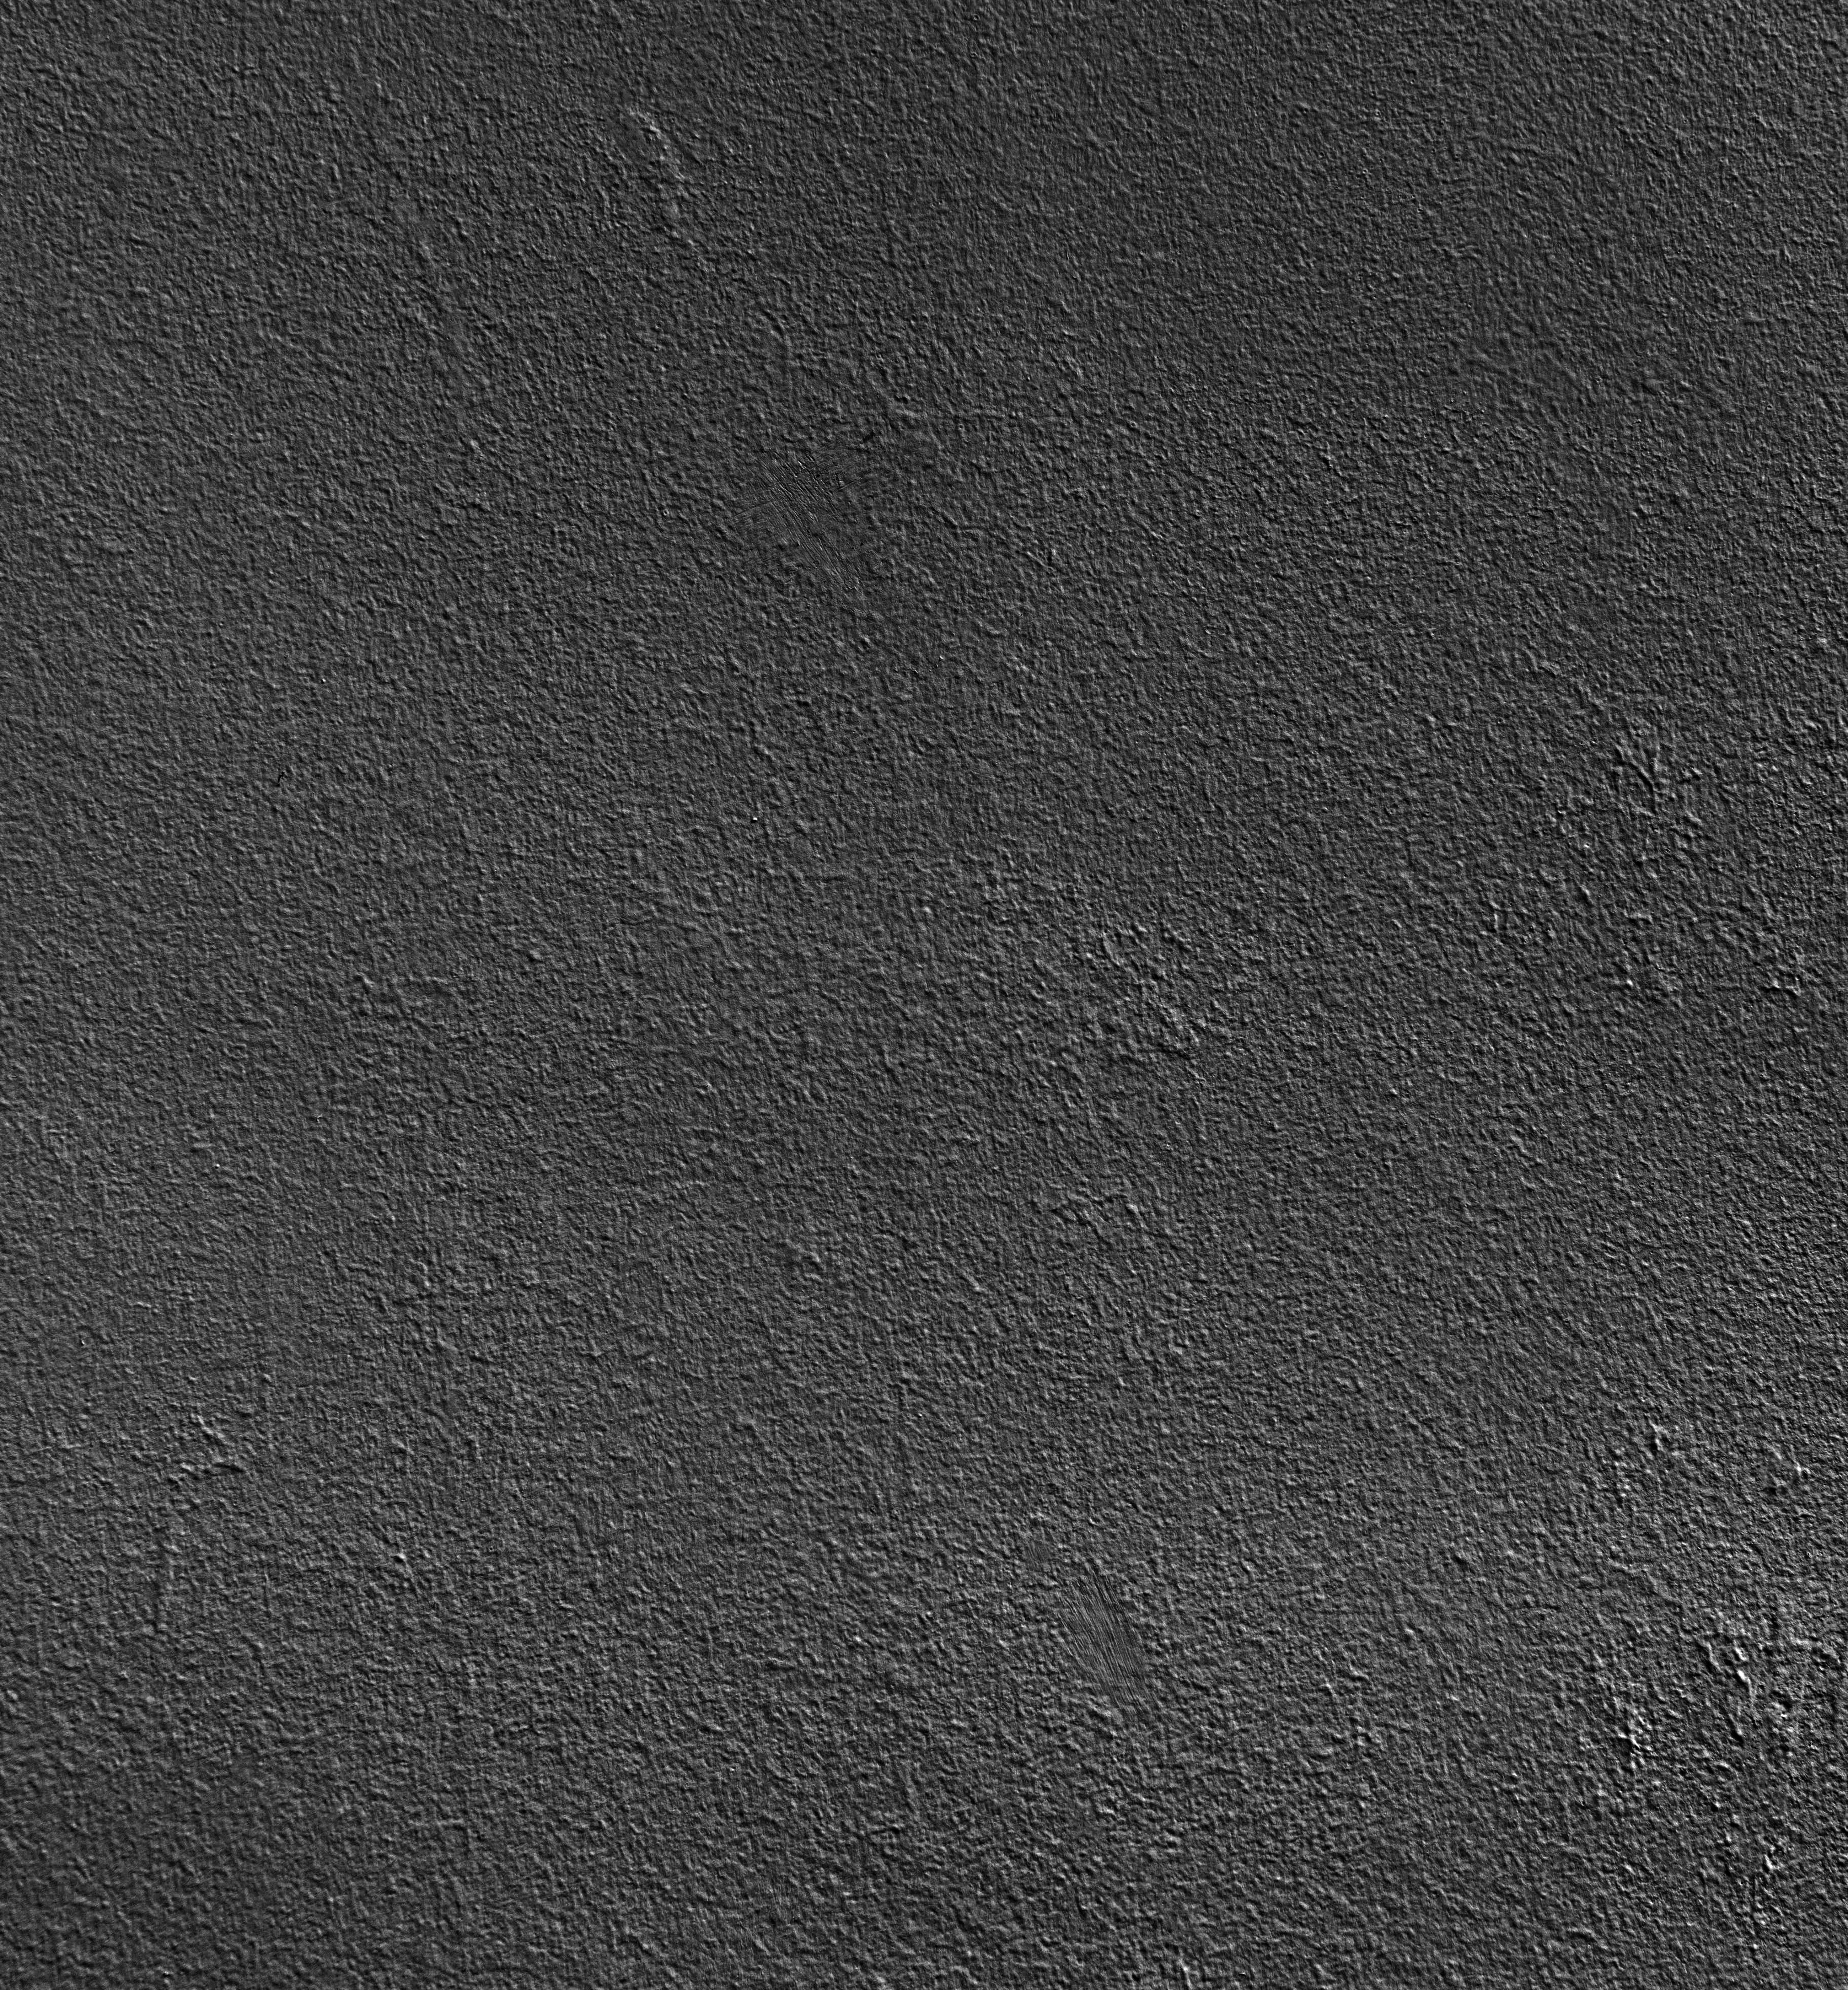 surface, texture, textures, wall, grey, rough, rugged Phone Background